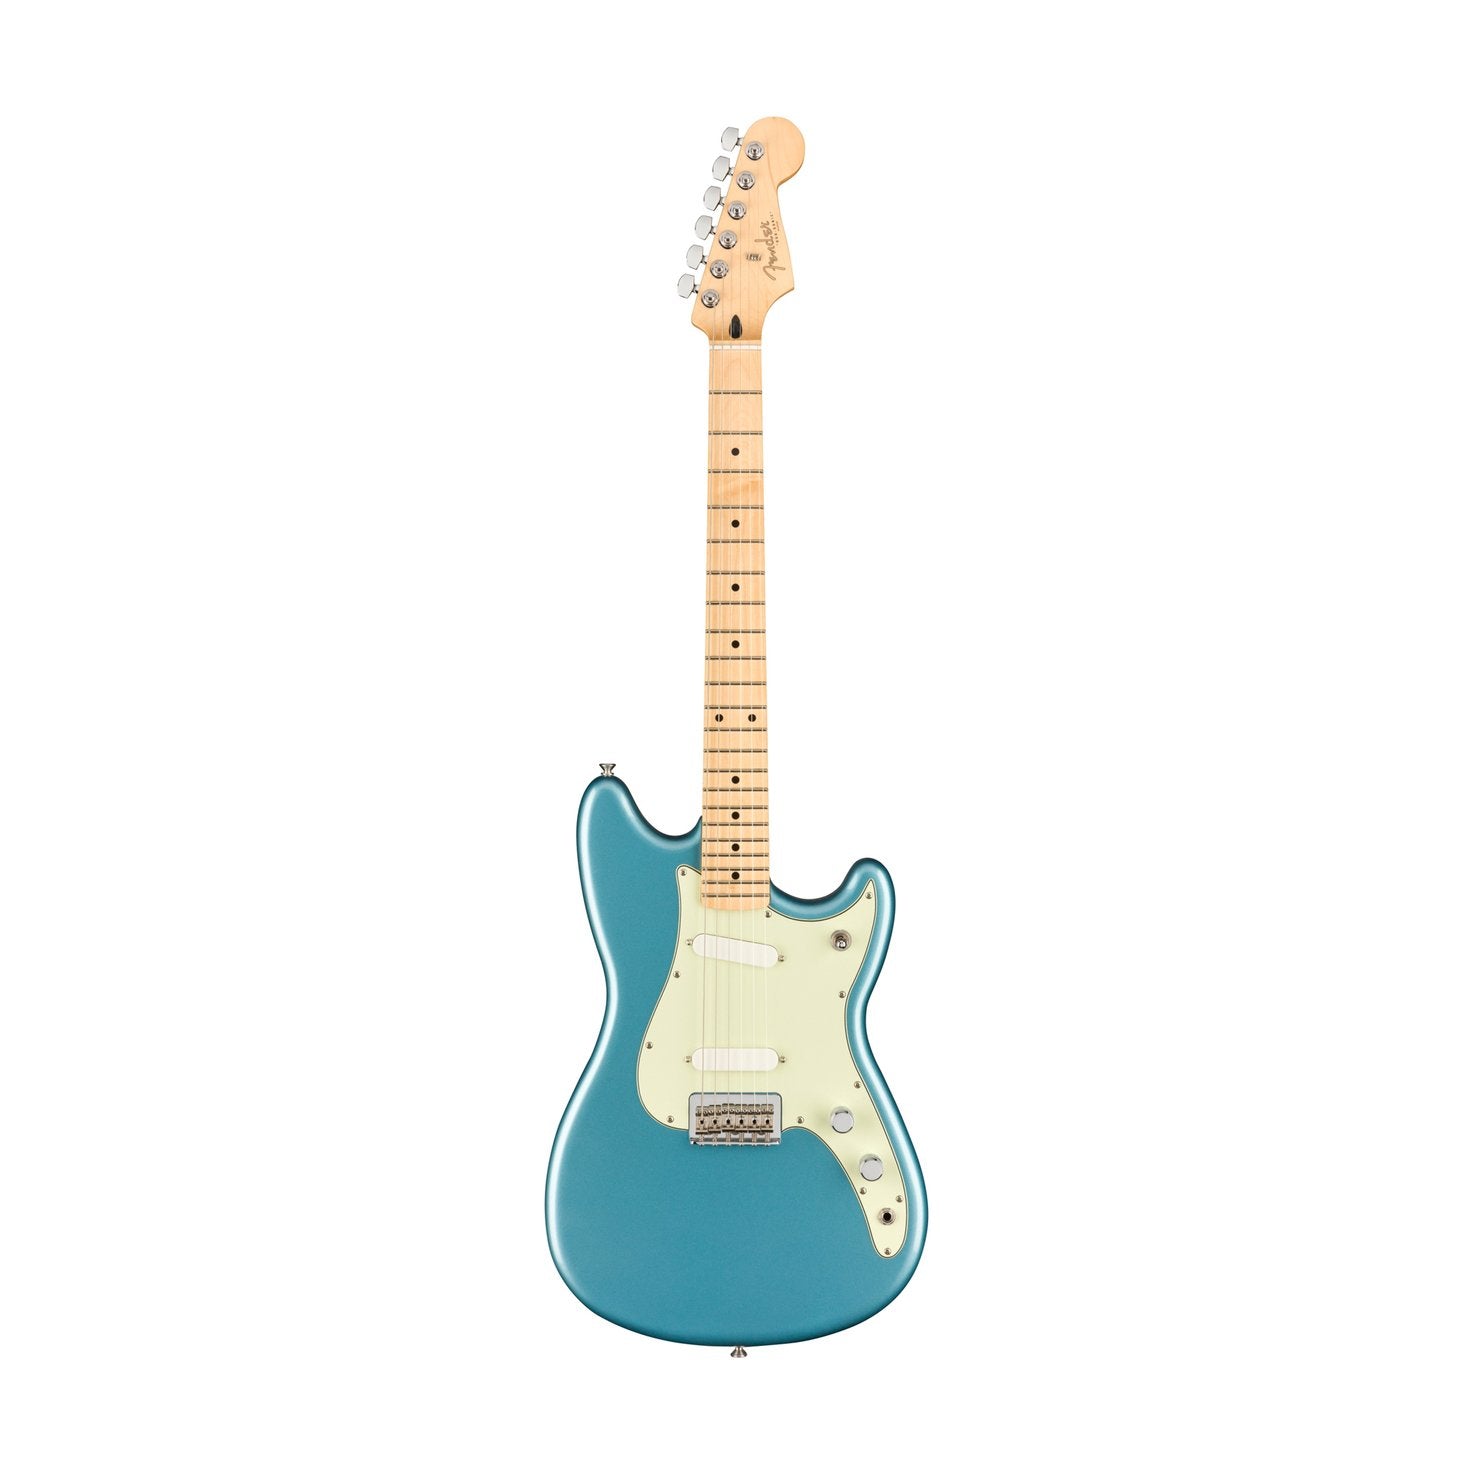 Fender Player Duo-Sonic Electric Guitar, Maple FB, Tidepool, FENDER, ELECTRIC GUITAR, fender-eletric-guitar-f03-014-4012-513, ZOSO MUSIC SDN BHD